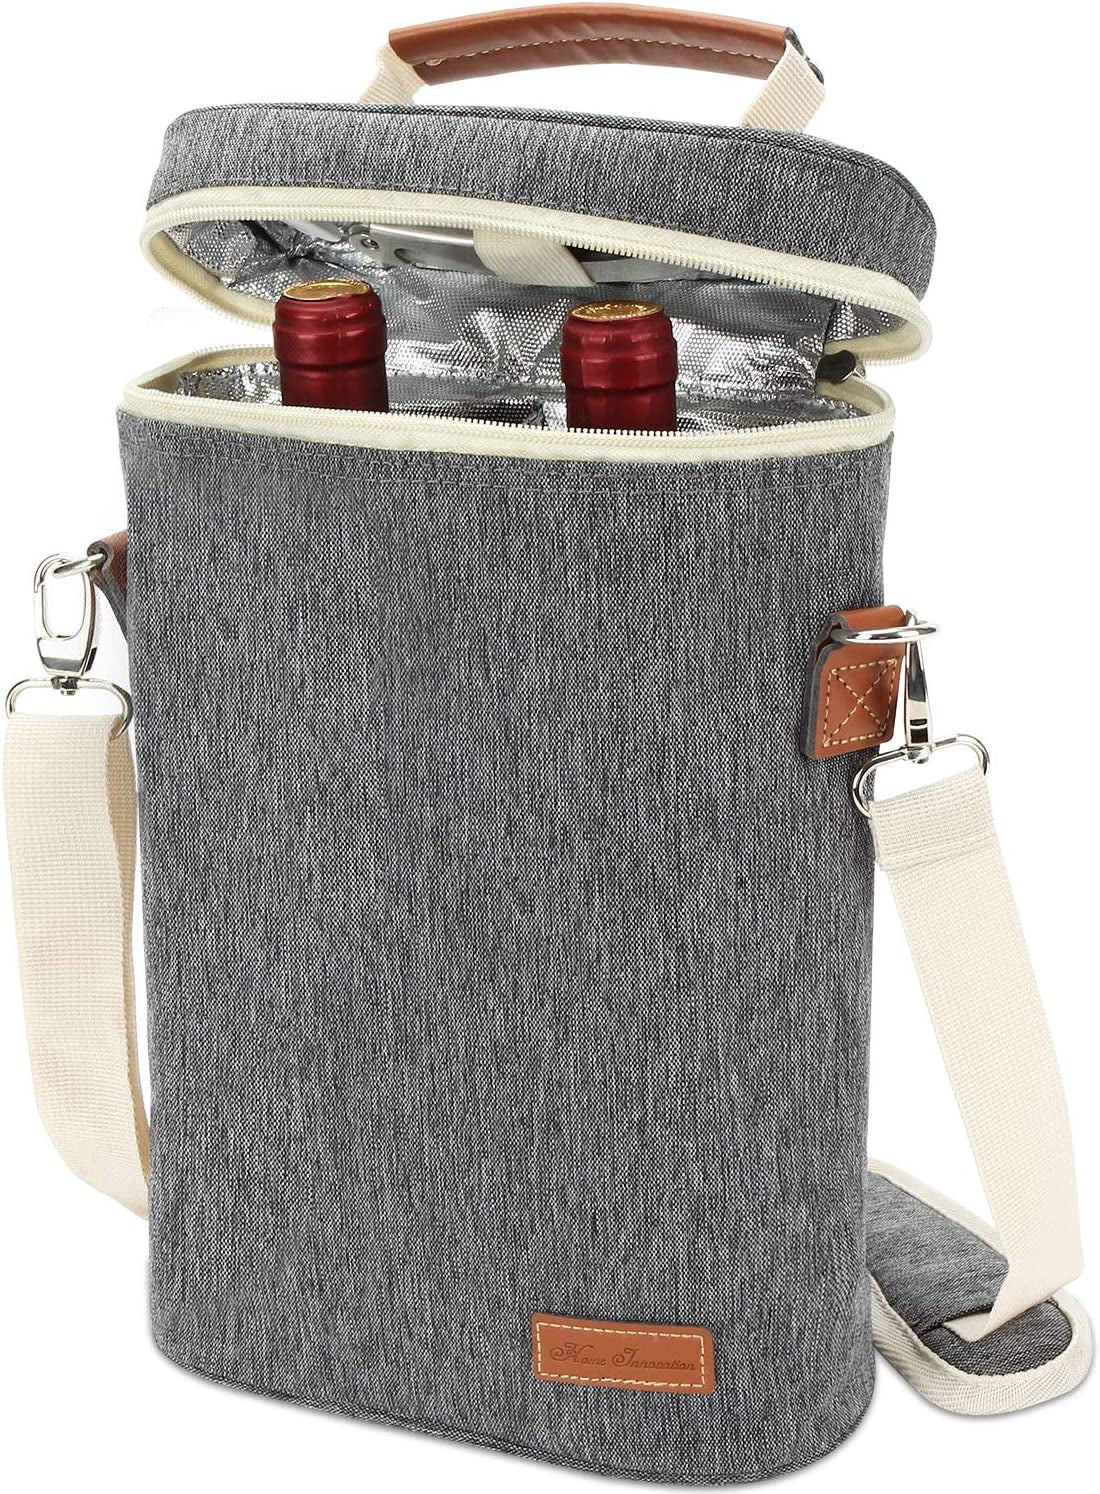 3 Bottle Insulated Wine Tote Cooler Bag, Portable Wine Carrier with Corkscrew Opener and Shoulder Strap for Beach Travel Picnic, Unique Wine Carrier for Wine Lover Gifts Grey